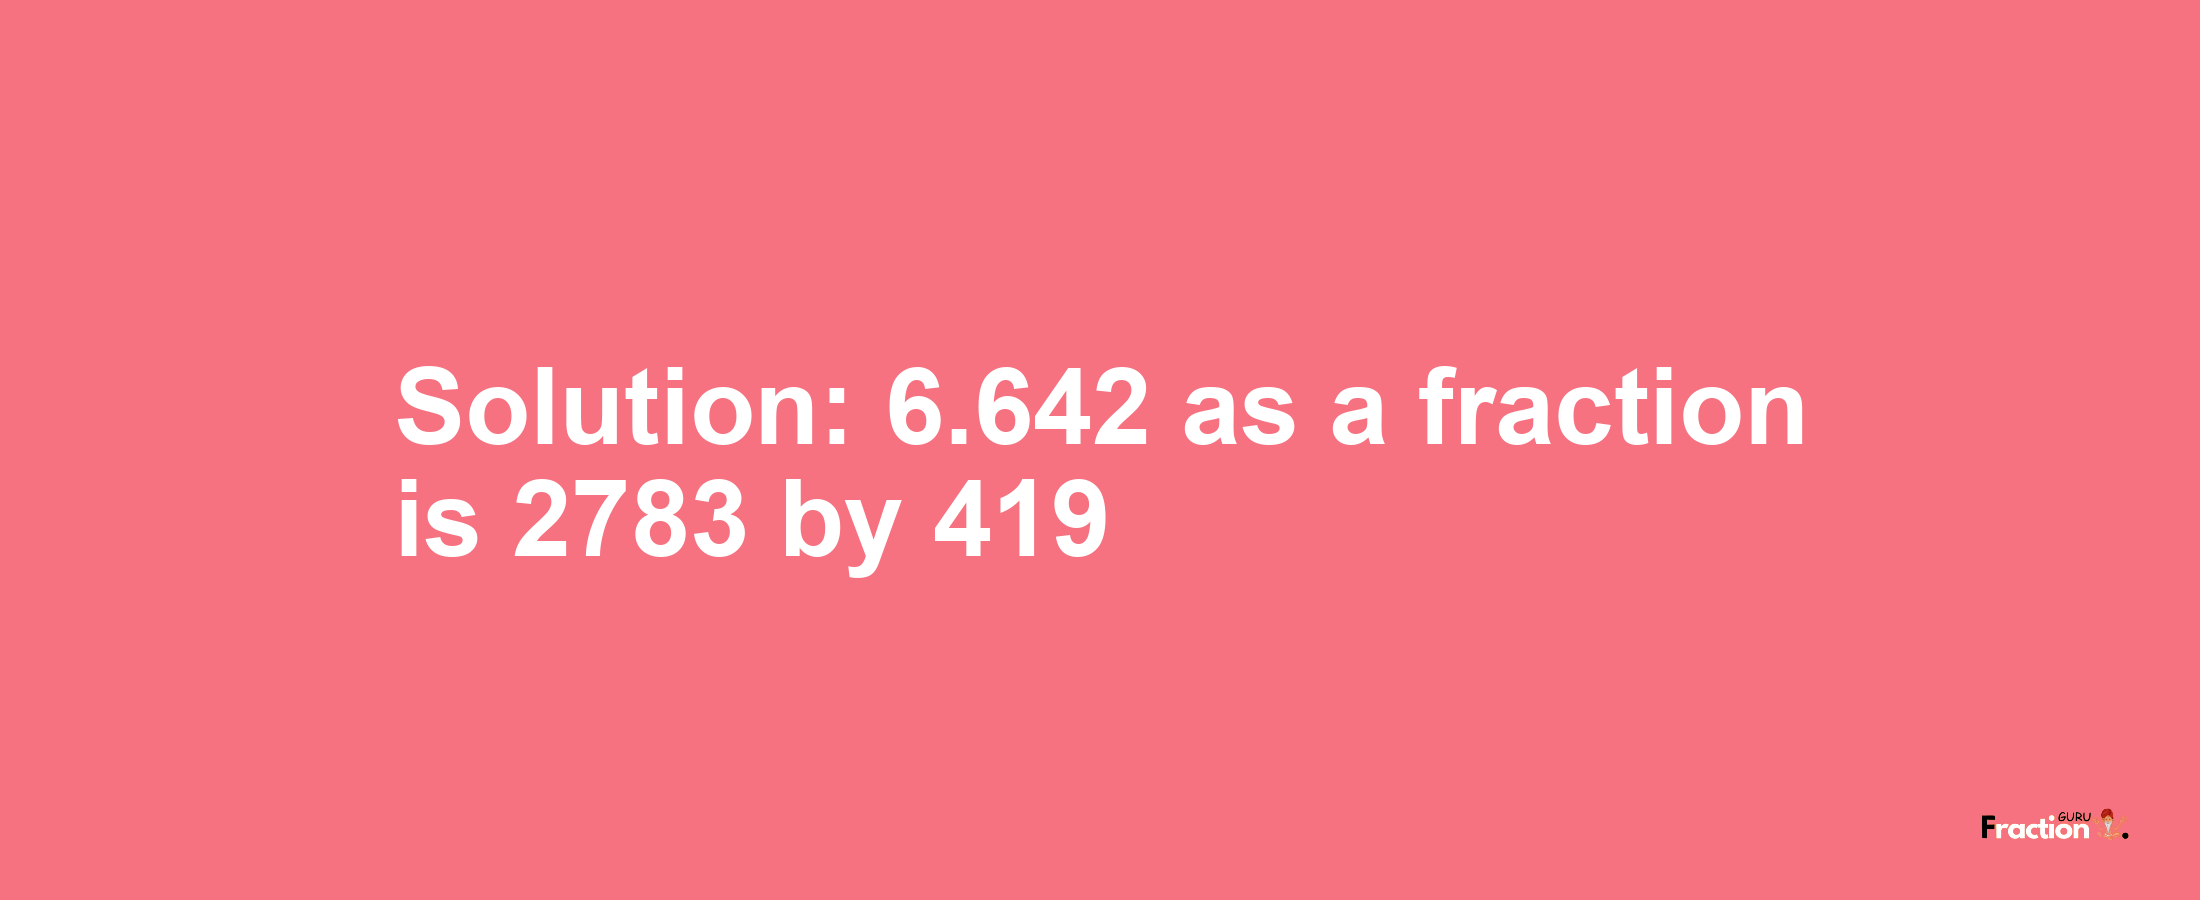 Solution:6.642 as a fraction is 2783/419